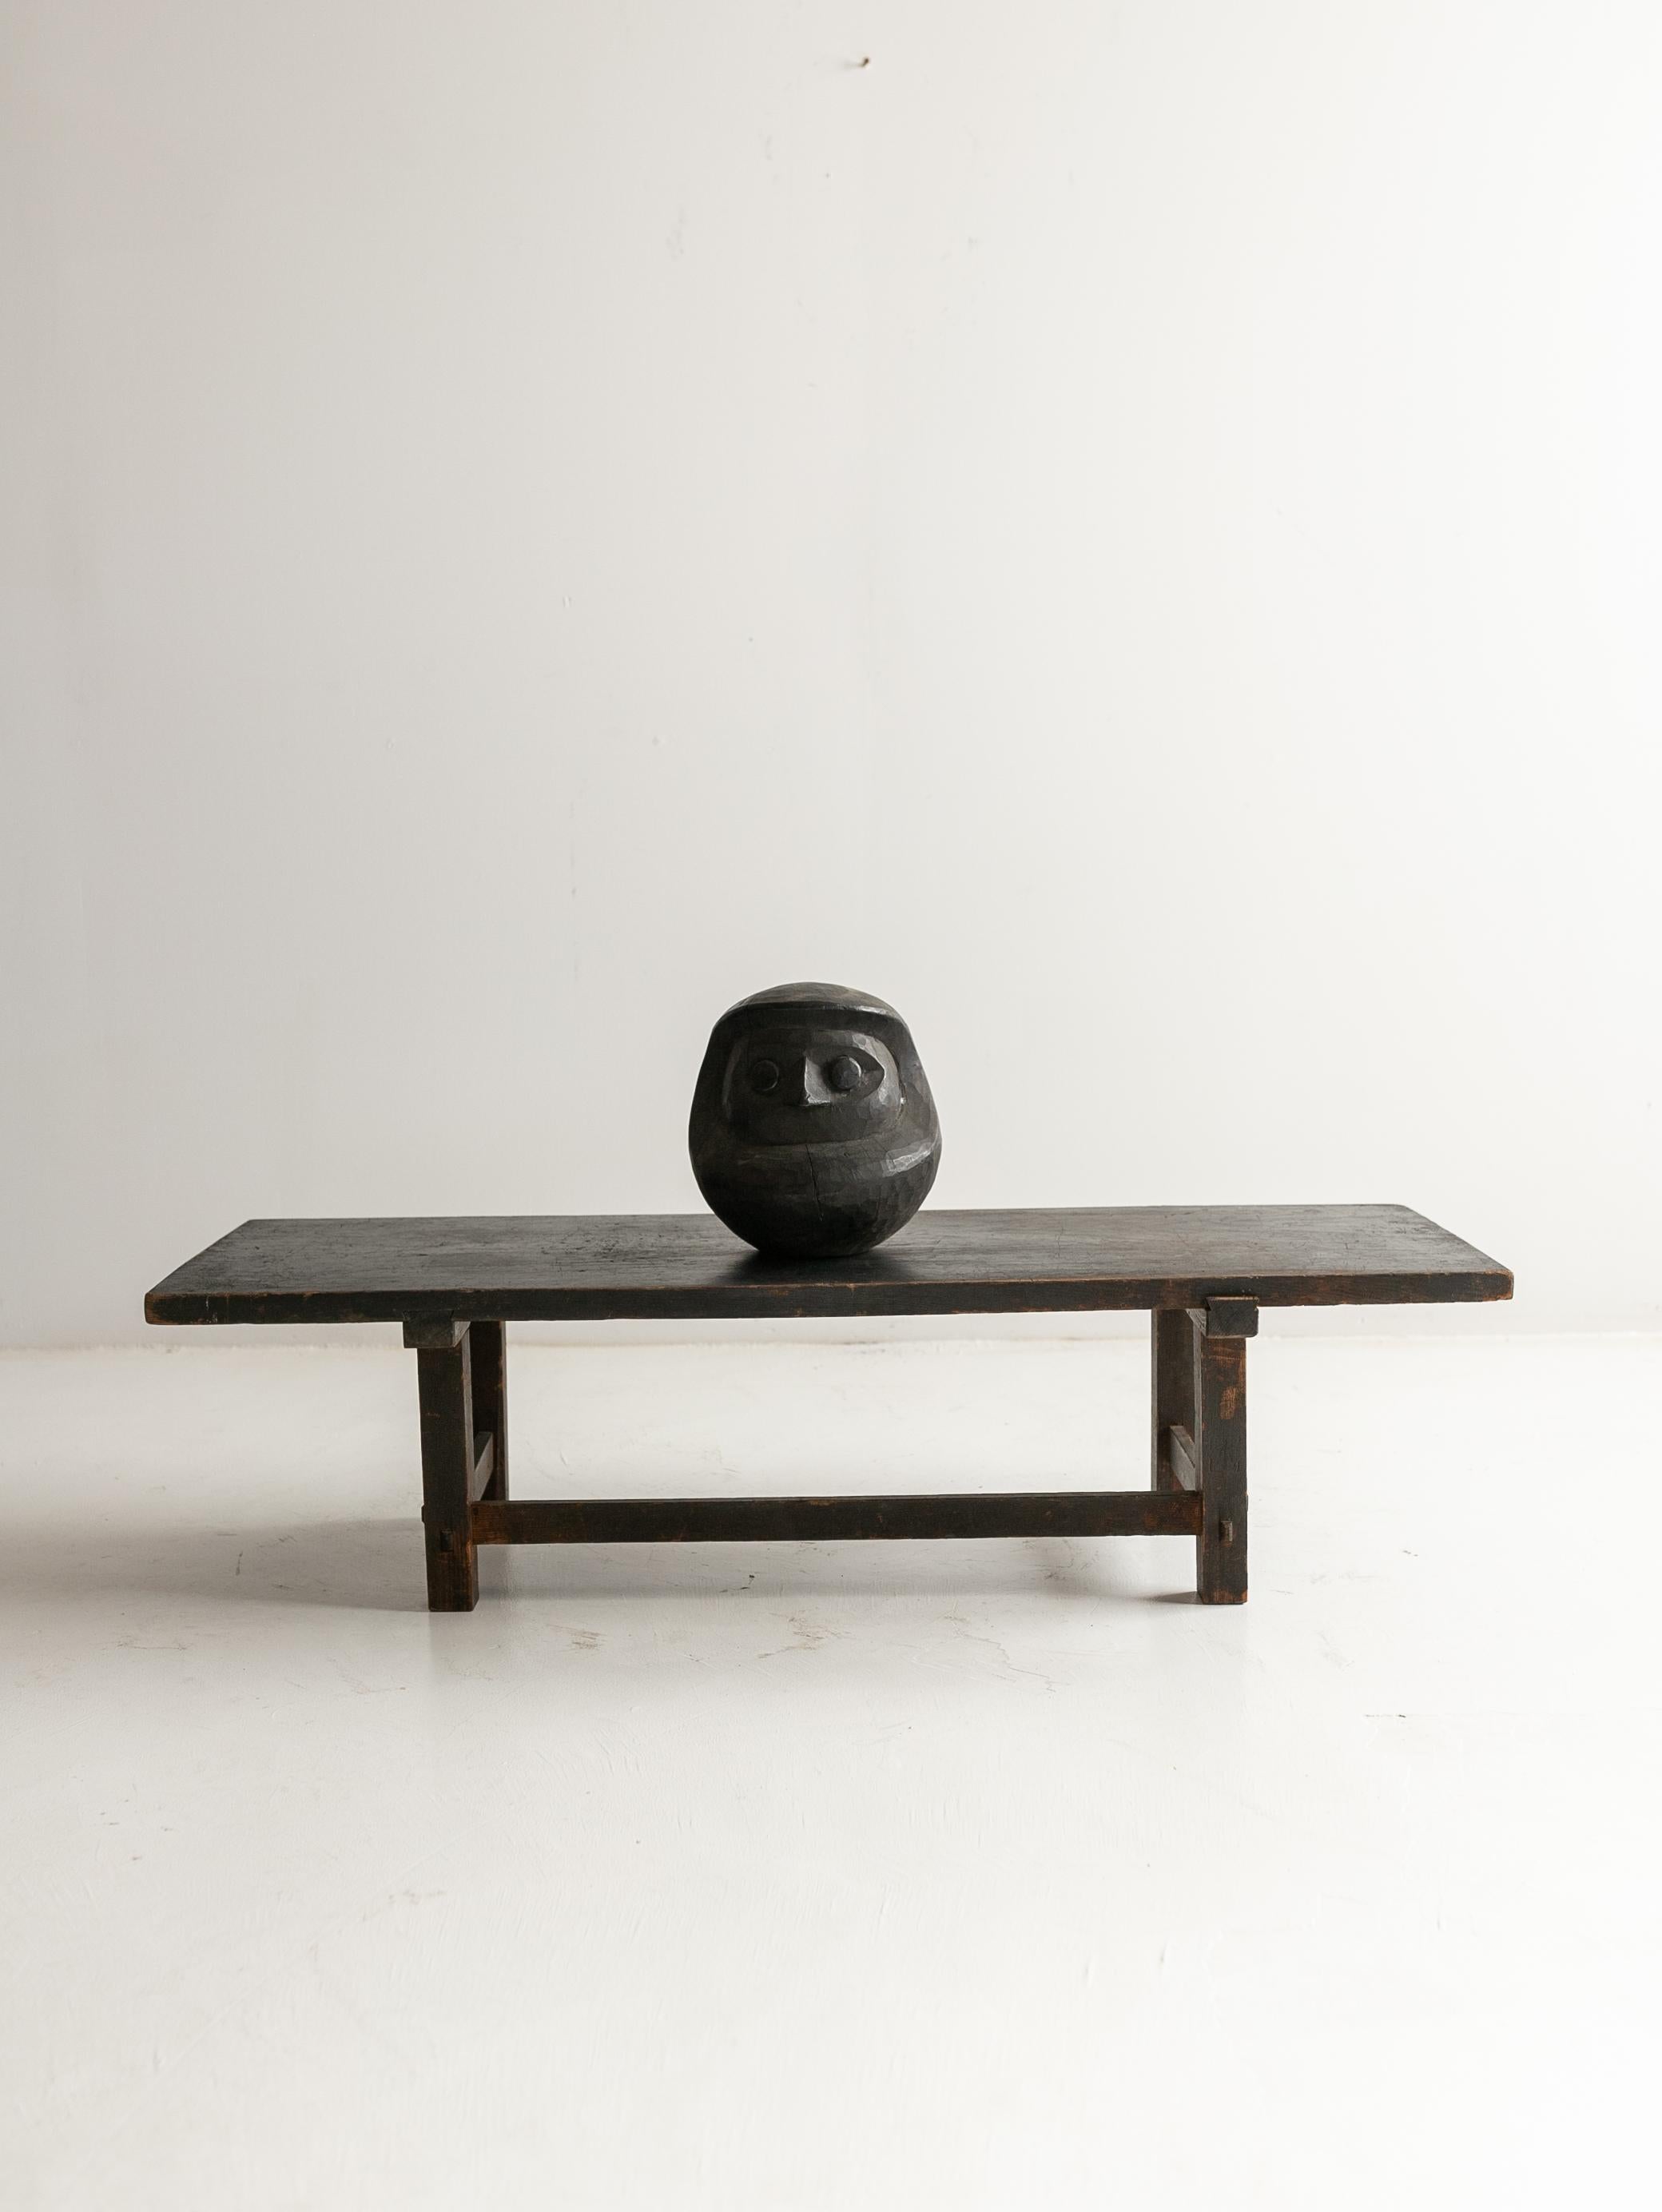 This Japanese antique wooden black low table was made between the late Edo and Meiji periods.
All materials are cedar wood. Cedar has been a common wood used for tools and furniture in Japan since ancient times.
The rustic grain of the top panel is